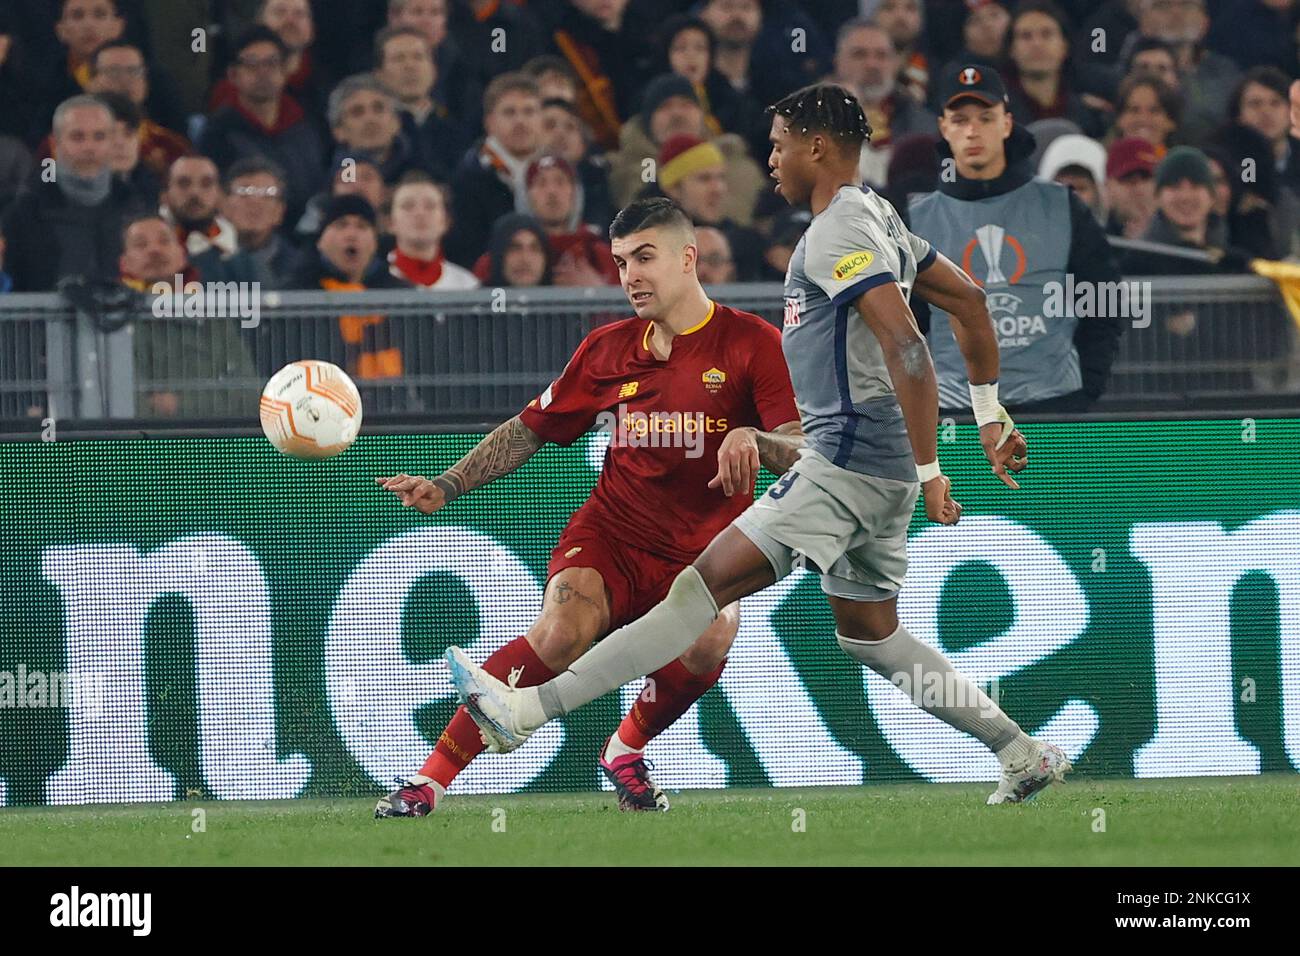 Rome, Italy. 23rd Feb, 2023. Roger Ibanez da Silva of AS Roma Junior Adamu of Salzburg during AS Roma vs RB Salzburg, football Europa League match in Rome, Italy, February 23 2023 Credit: Independent Photo Agency/Alamy Live News Stock Photo